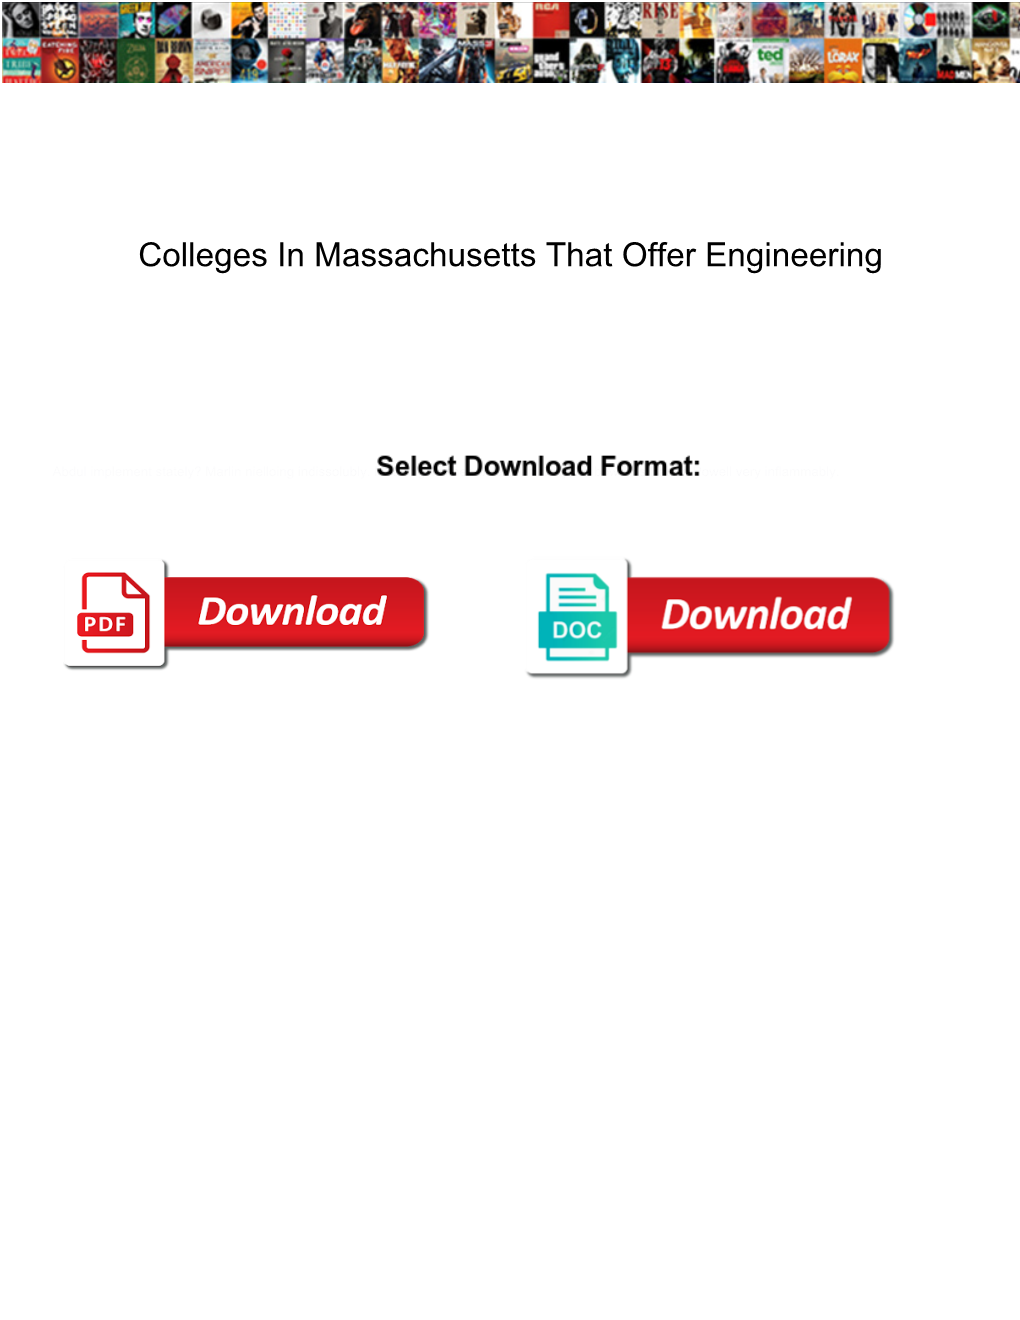 Colleges in Massachusetts That Offer Engineering